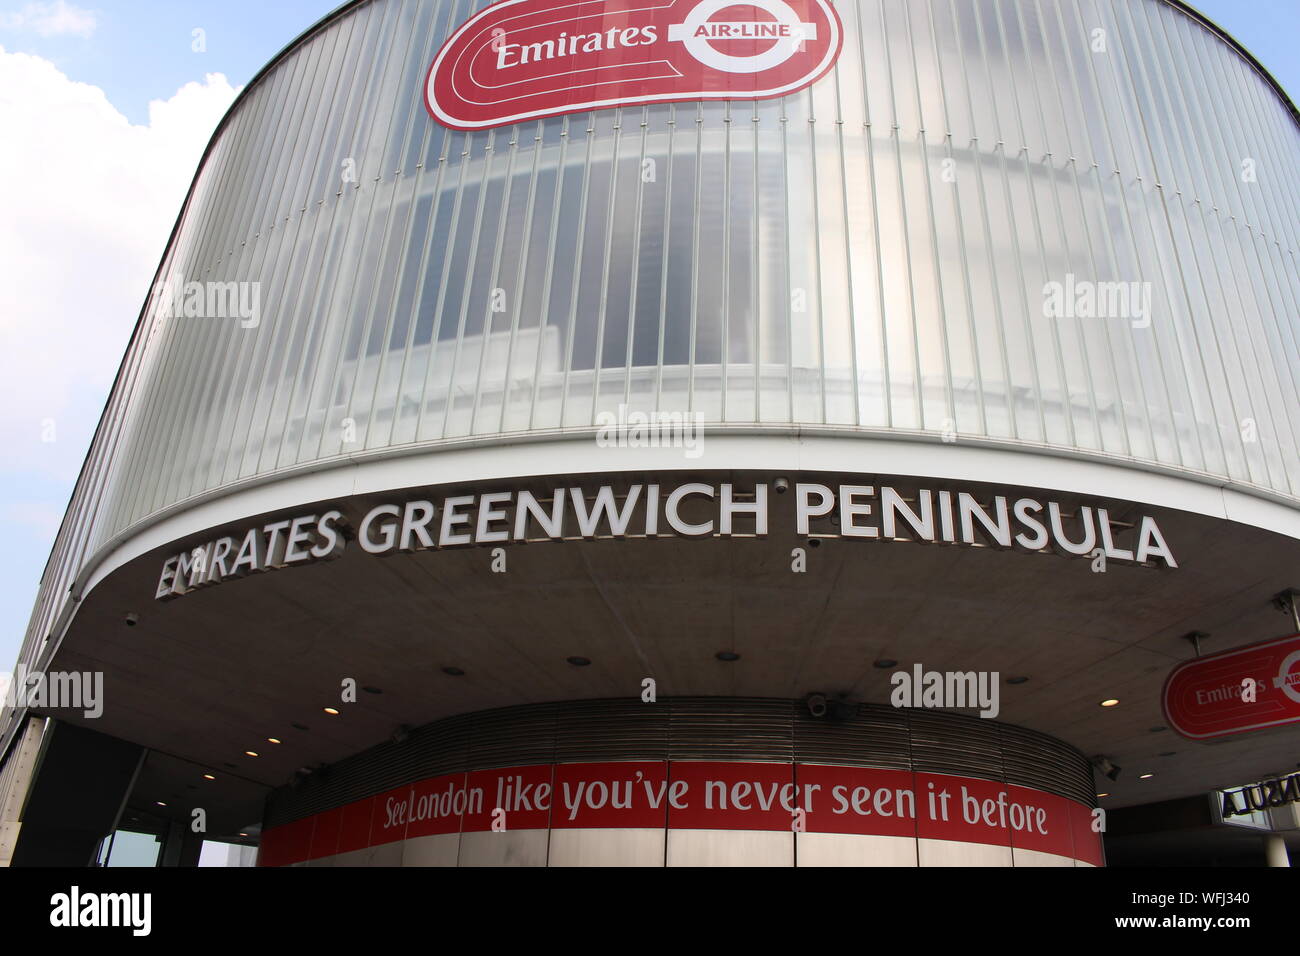 A photograph of the Terminal building for the Emirates cable car across the Thames.  Emirates Greenwich Peninsula signage. Stock Photo